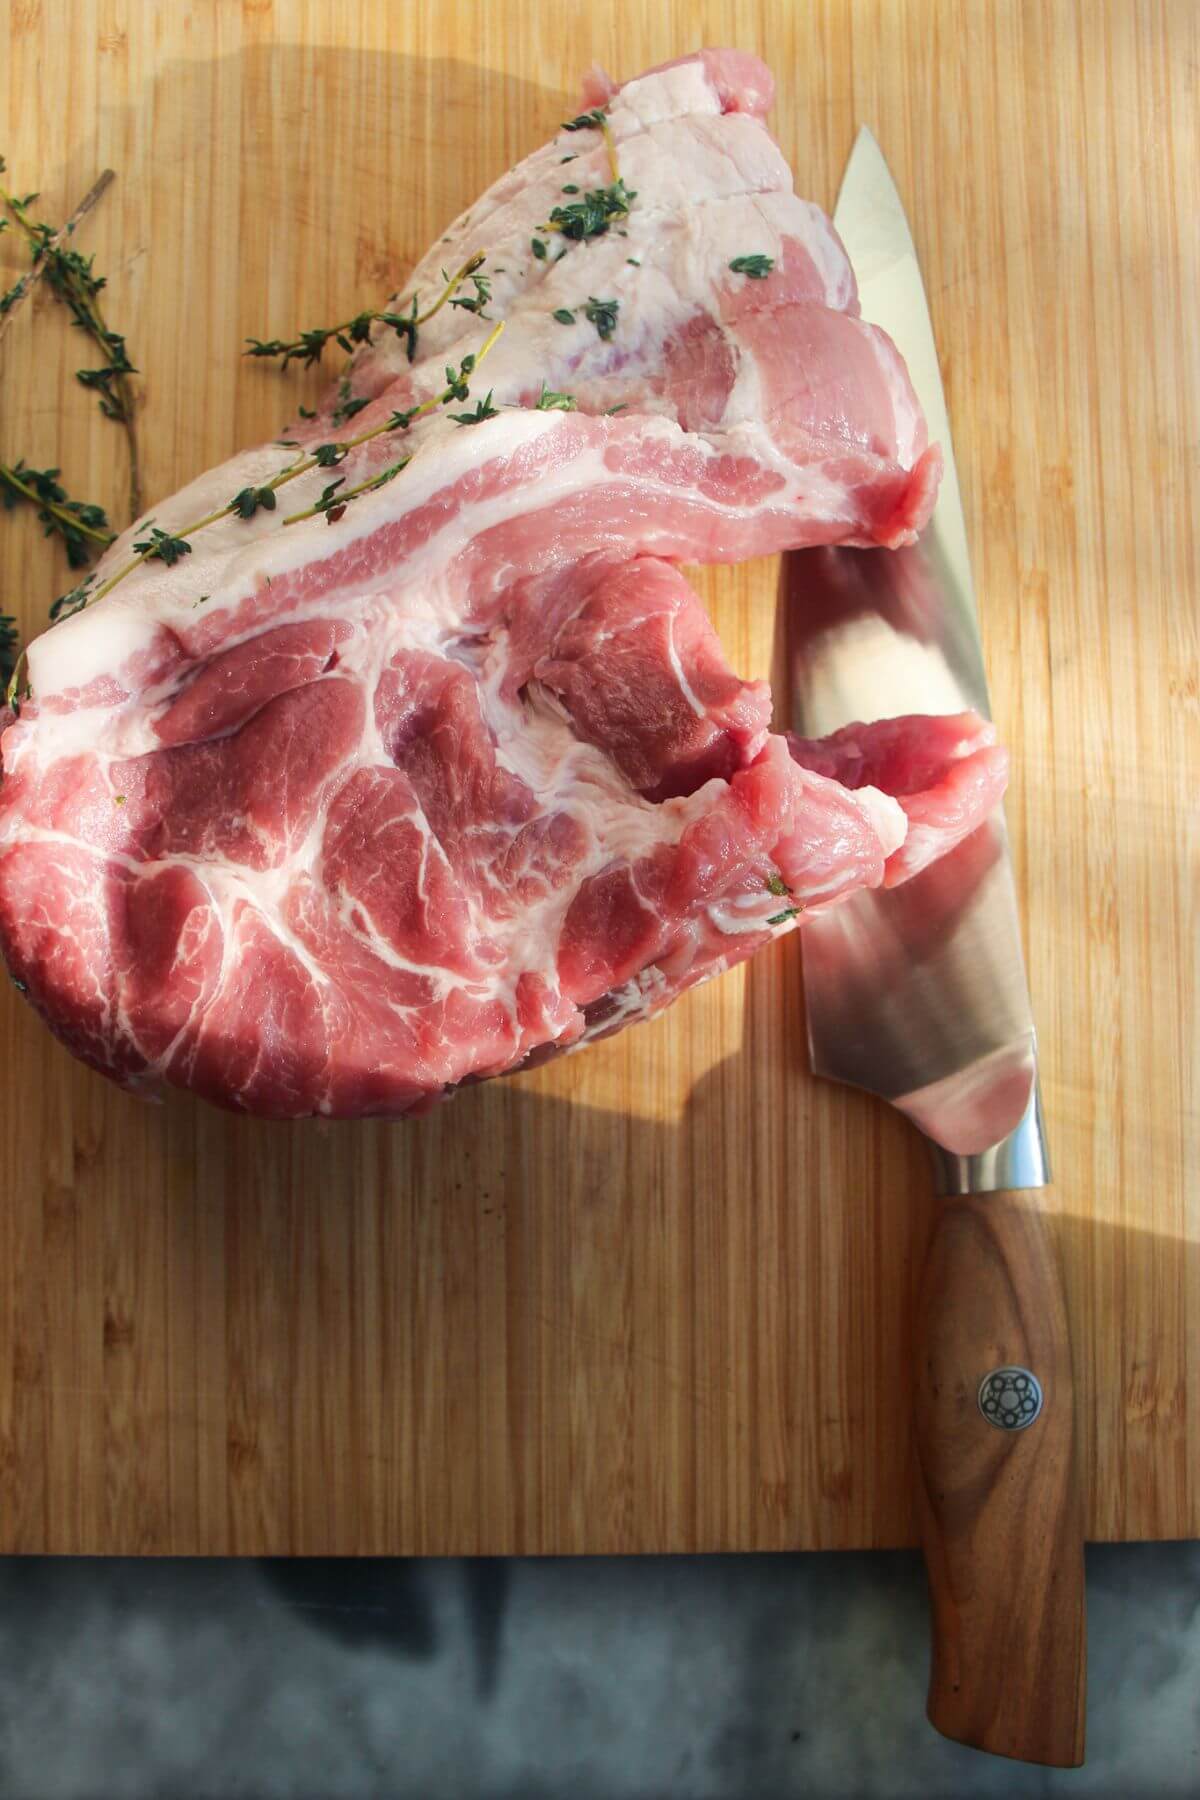 Piece of pork shoulder on a wooden board with a large knife next to it.